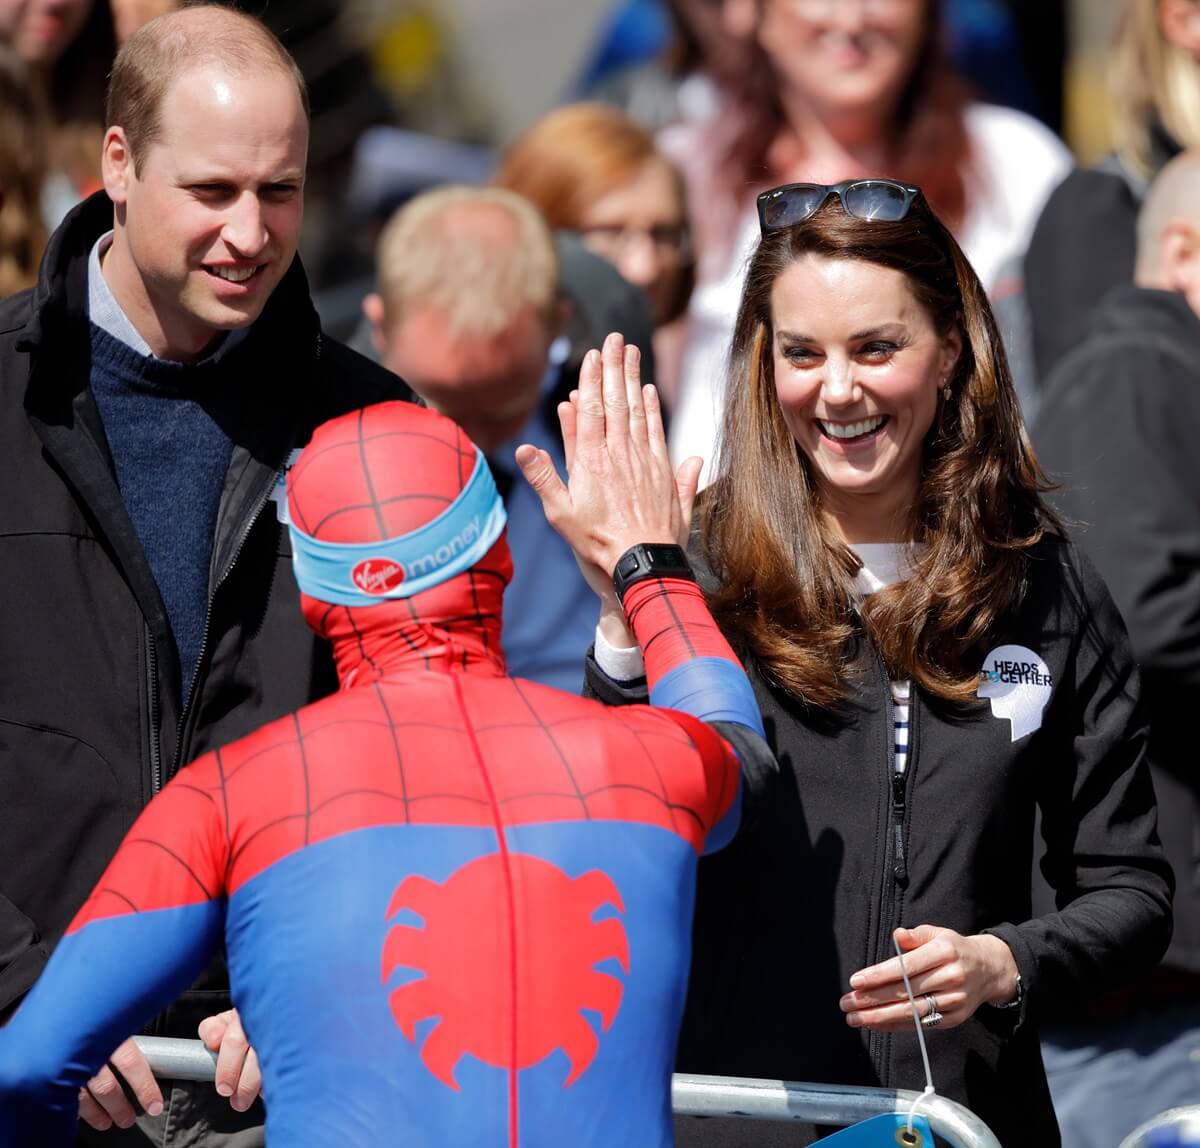 Prince William and Kate Middleton, who celebrate some Halloween traditions, meet a runner dressed as Spiderman competing in the London marathon